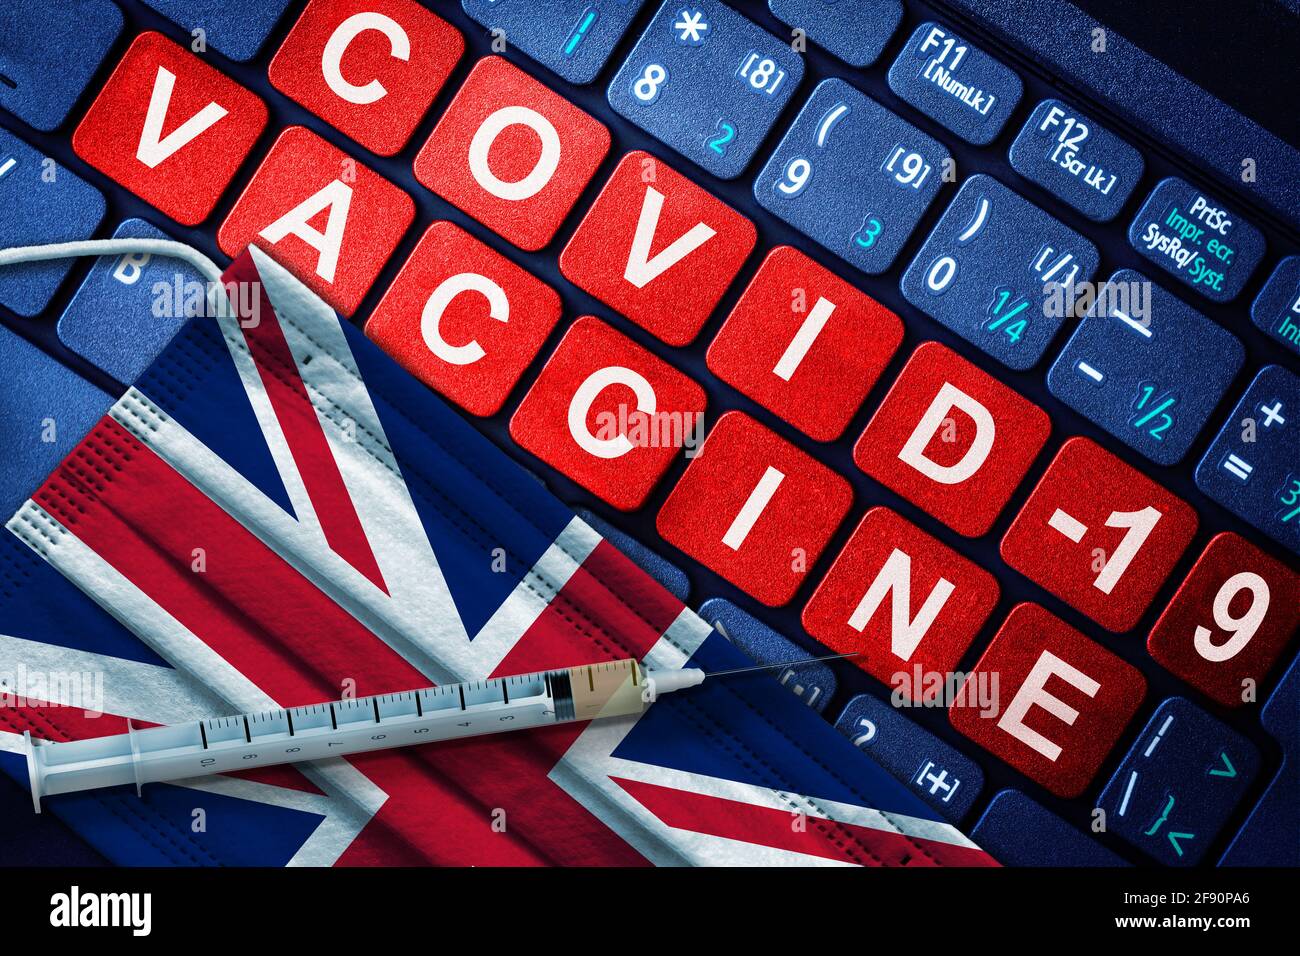 COVID-19 immunization in UK showing syringe and face mask with British flag and vaccine message on computer keyboard. Concept of Covid vaccination in Stock Photo